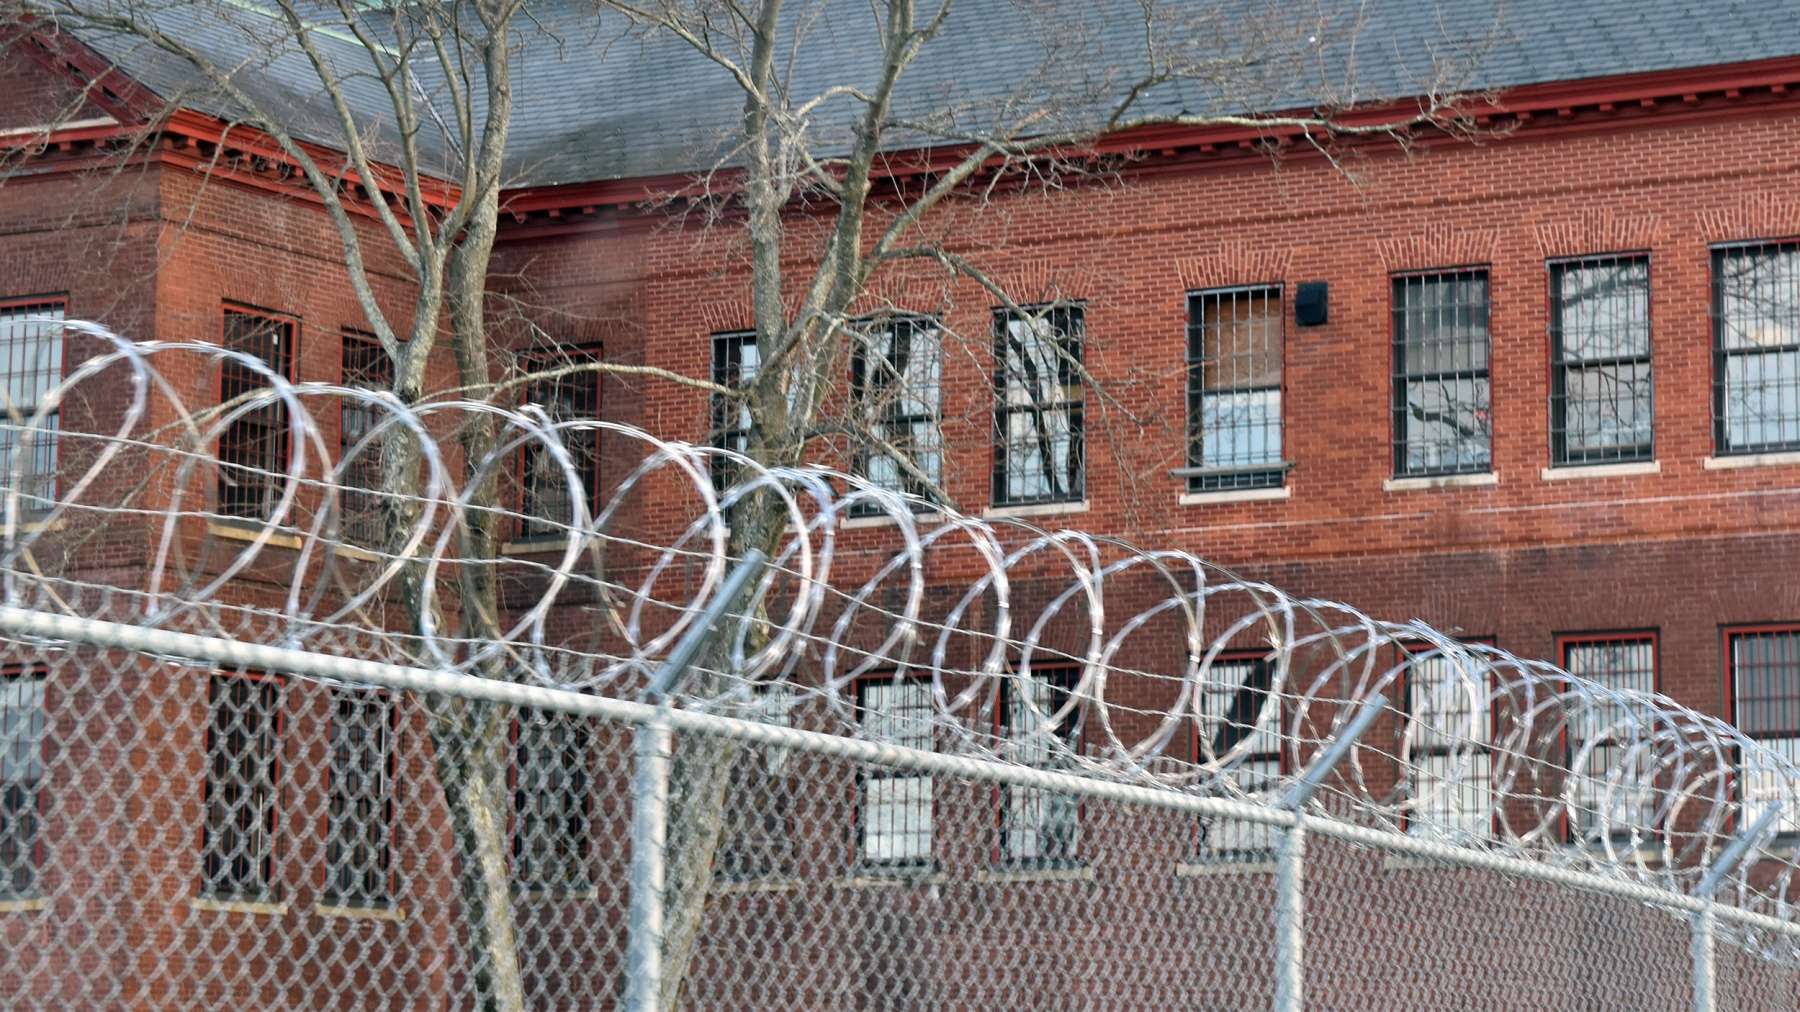 ACLU sues RI Dept of Corrections over continued incarceration of inmates granted parole